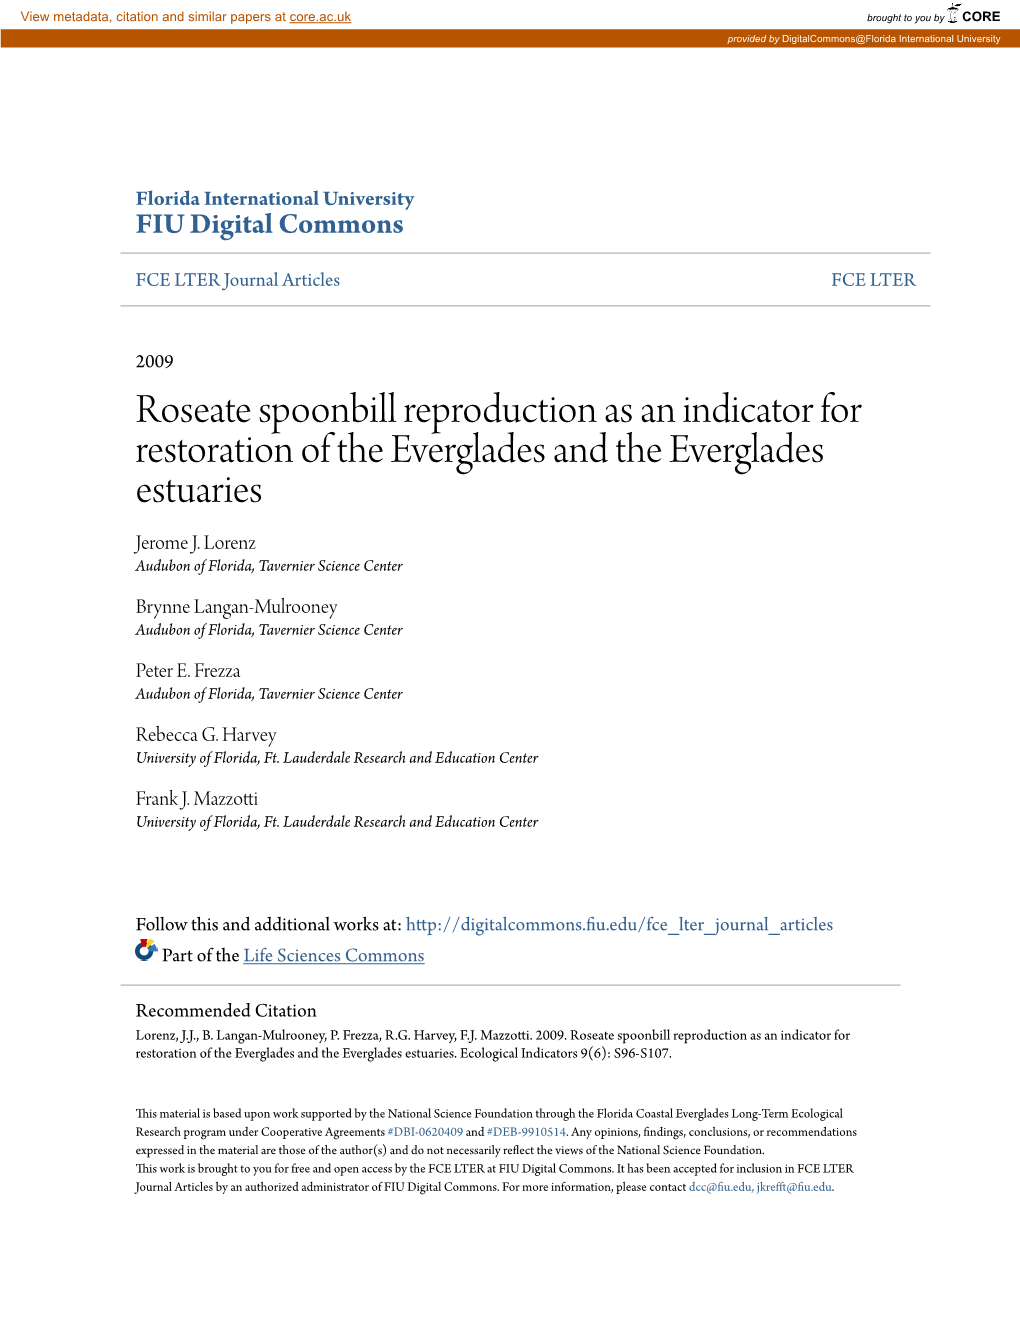 Roseate Spoonbill Reproduction As an Indicator for Restoration of the Everglades and the Everglades Estuaries Jerome J